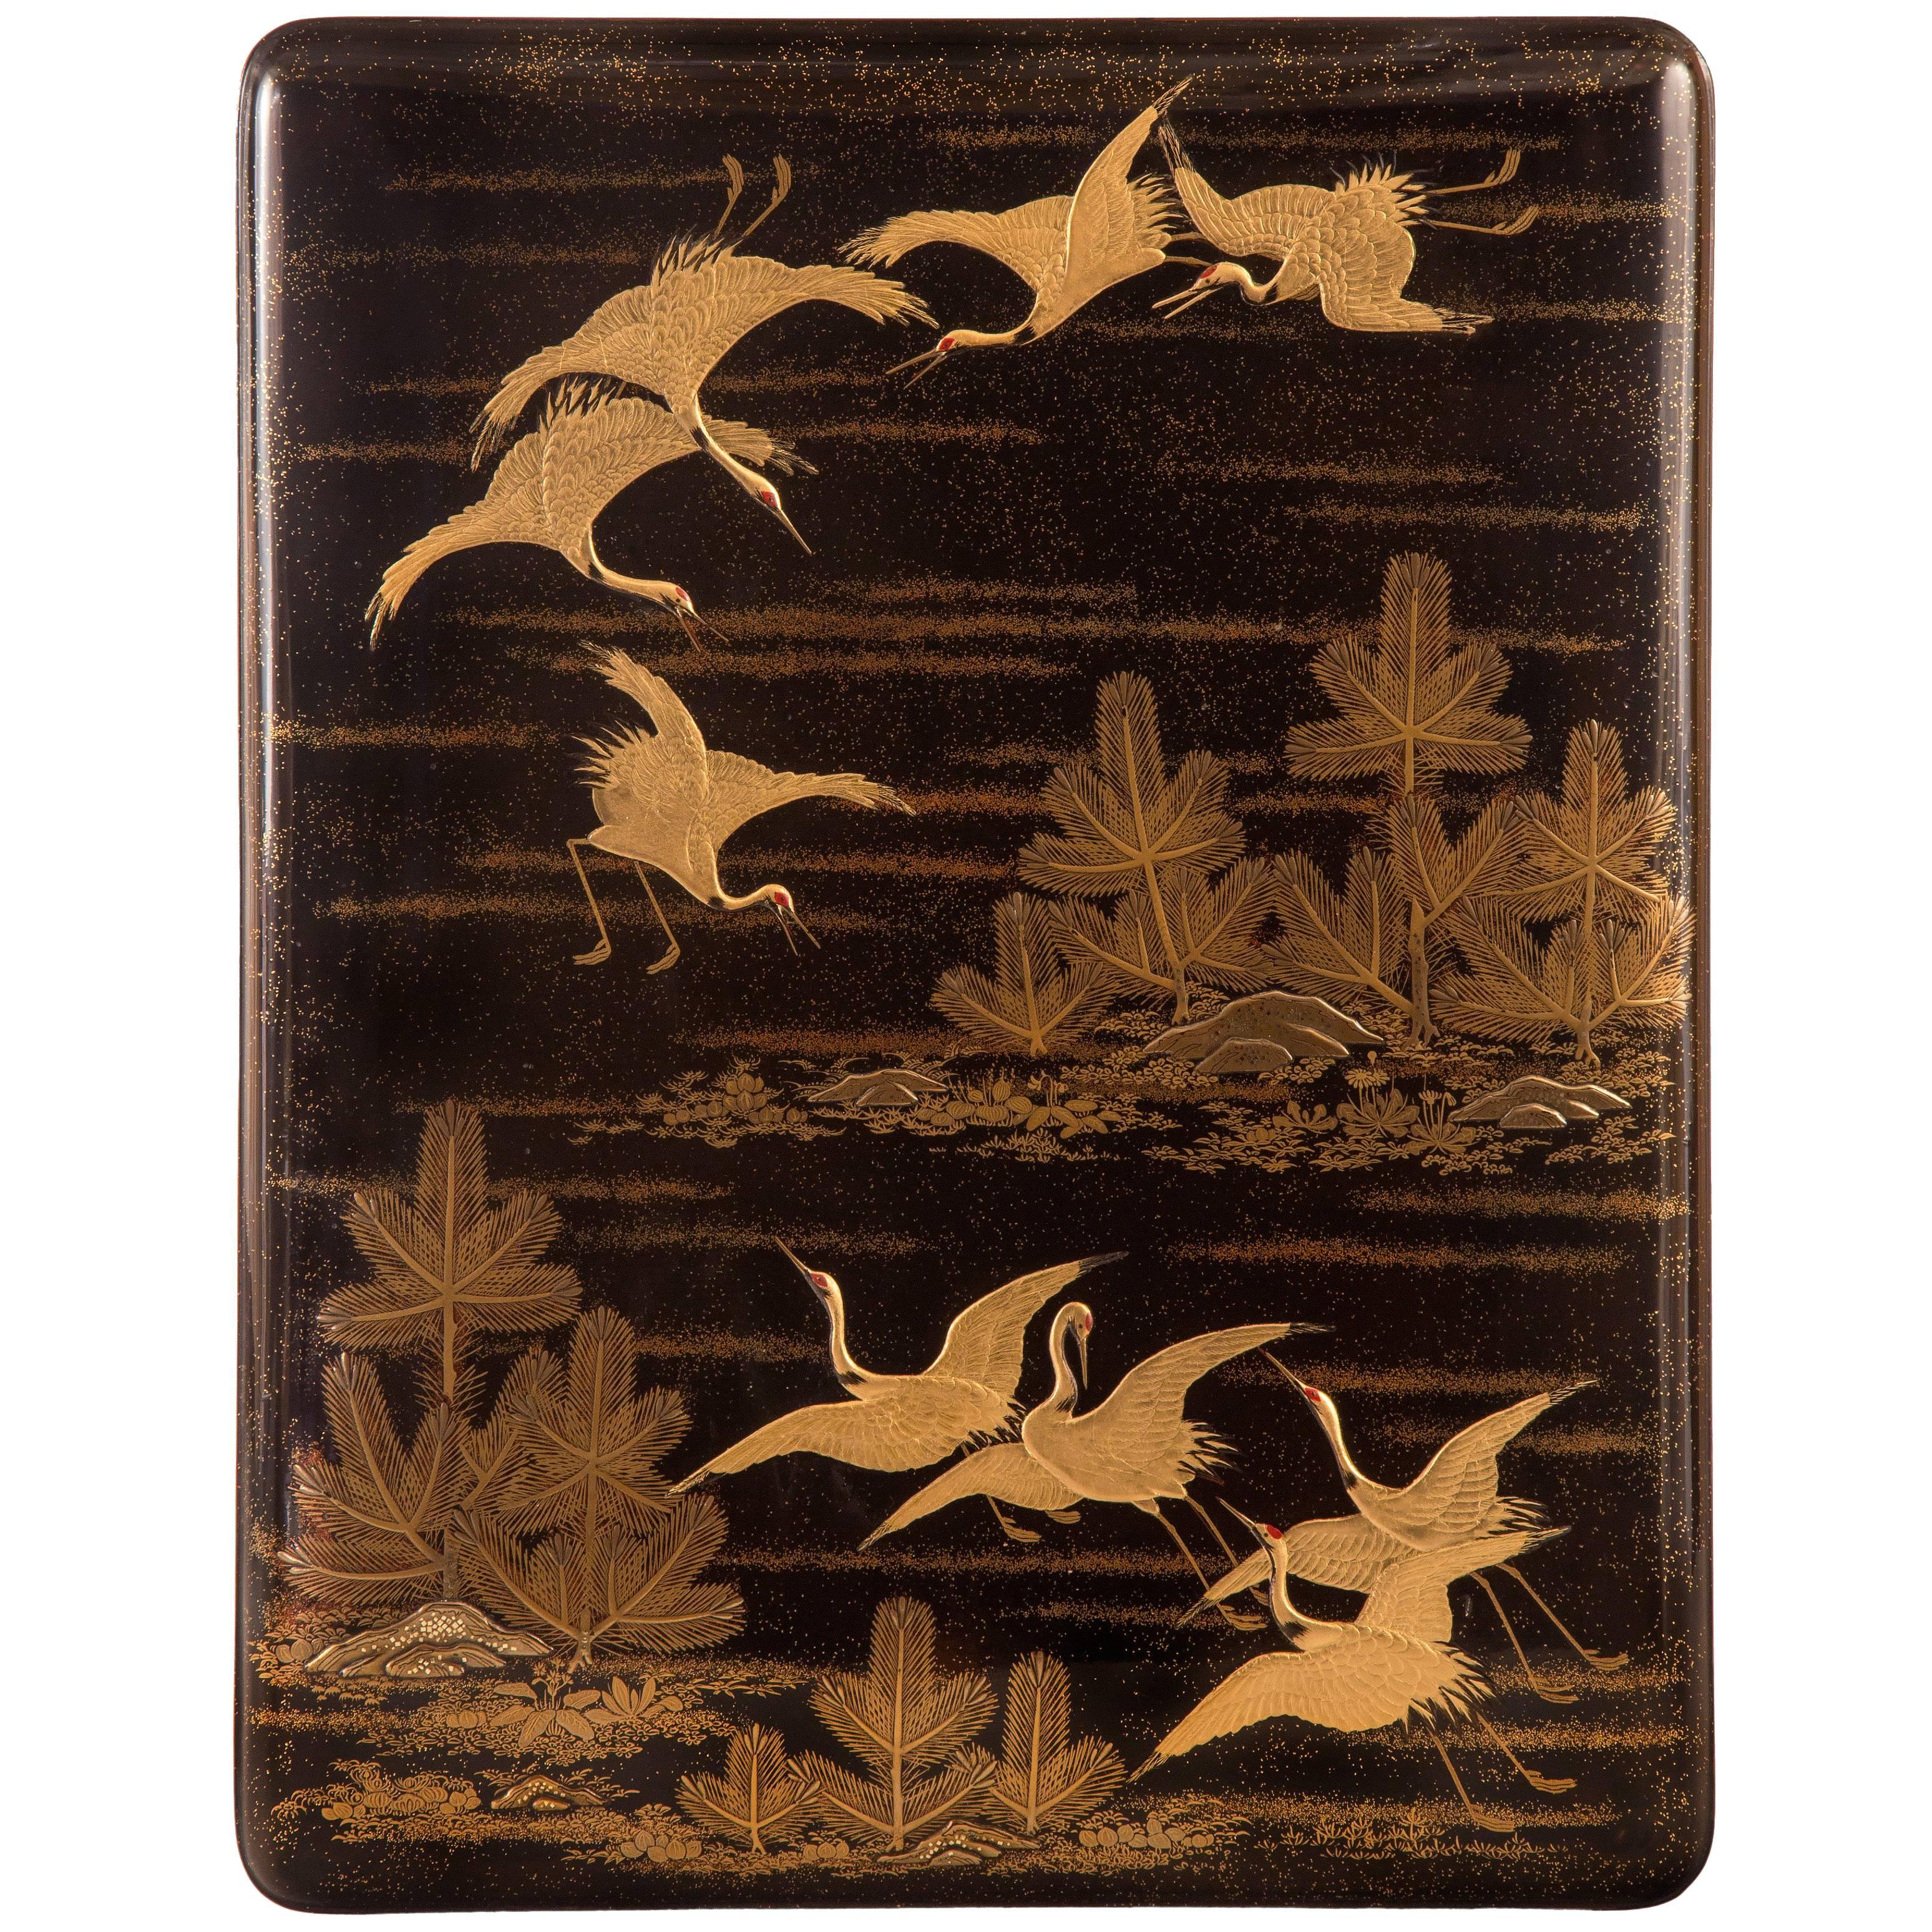 A Large Japanese Gold Lacquer Box (Bunko) Depicting Cranes and Pine Trees For Sale